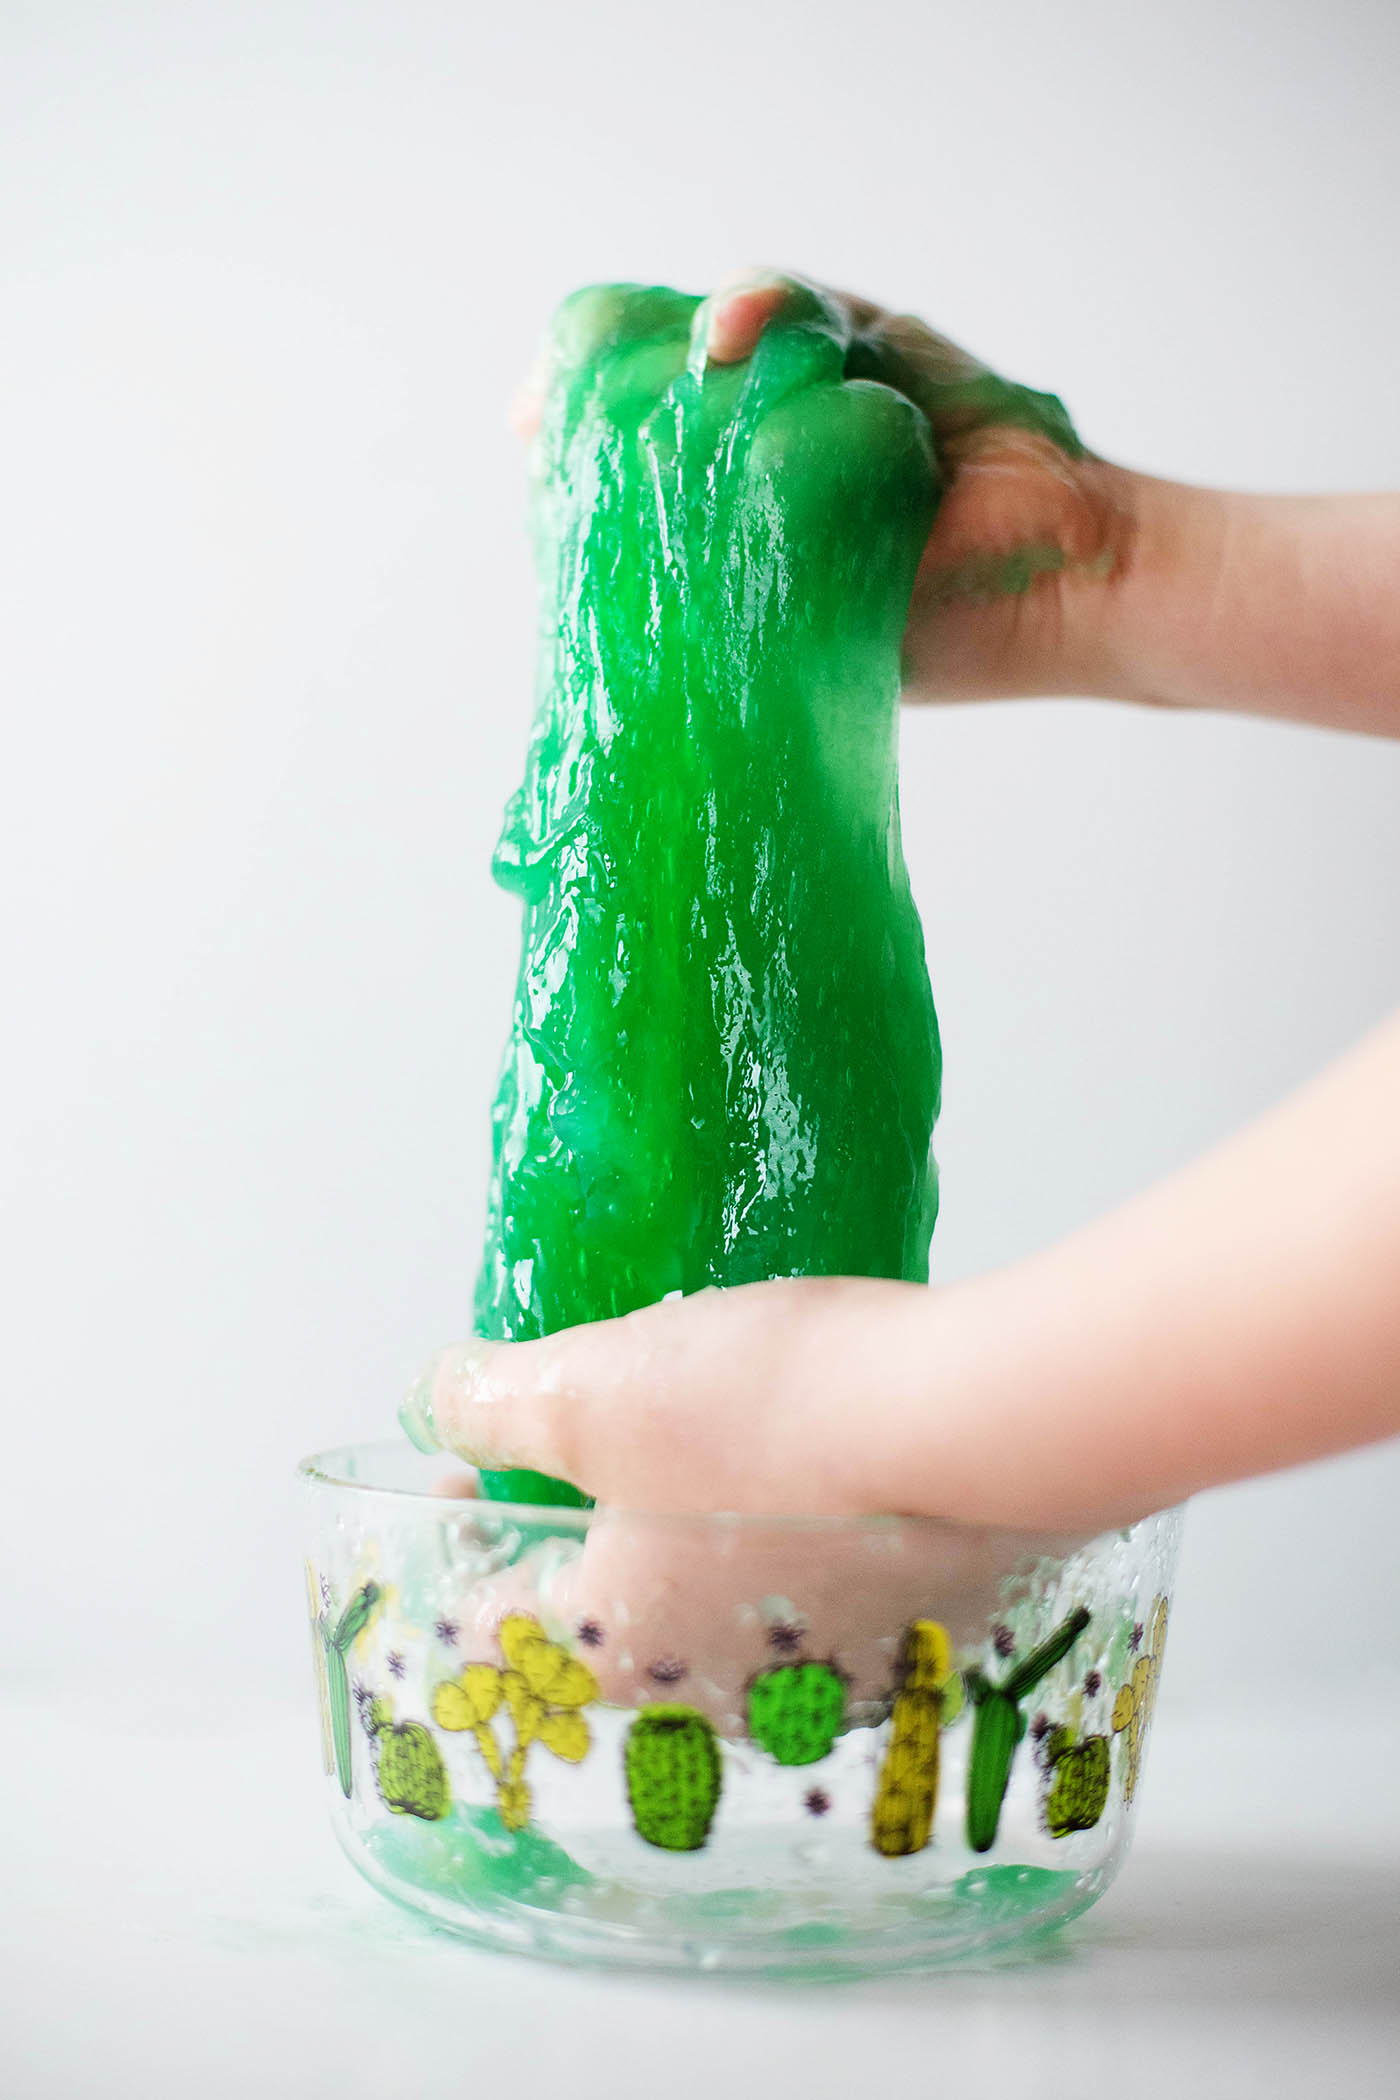 Is Slime Safe? - Borax Poses Potential Health Danger to Kids